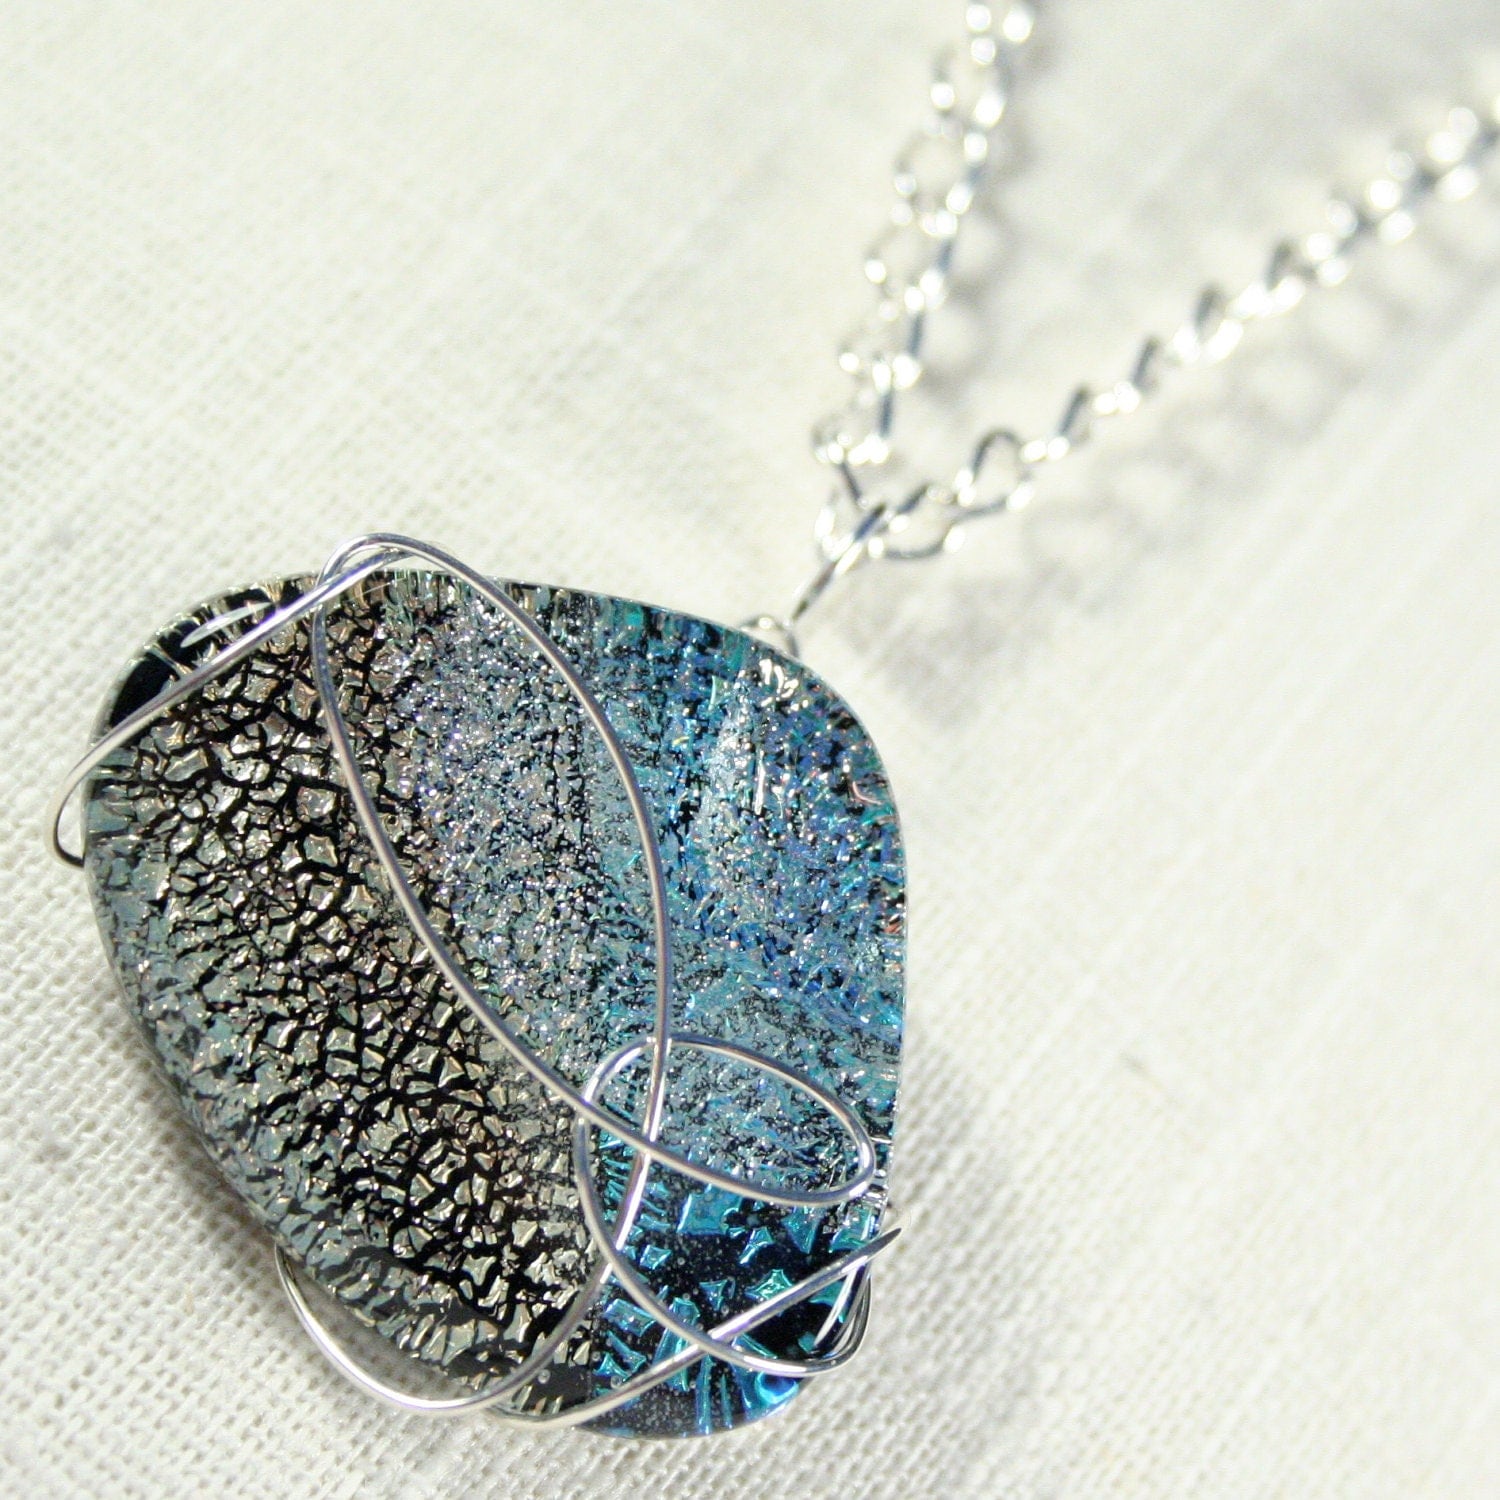 Necklace: Glass and wire, ocean inspired, dichroic glass necklace, wire-wrapped necklace